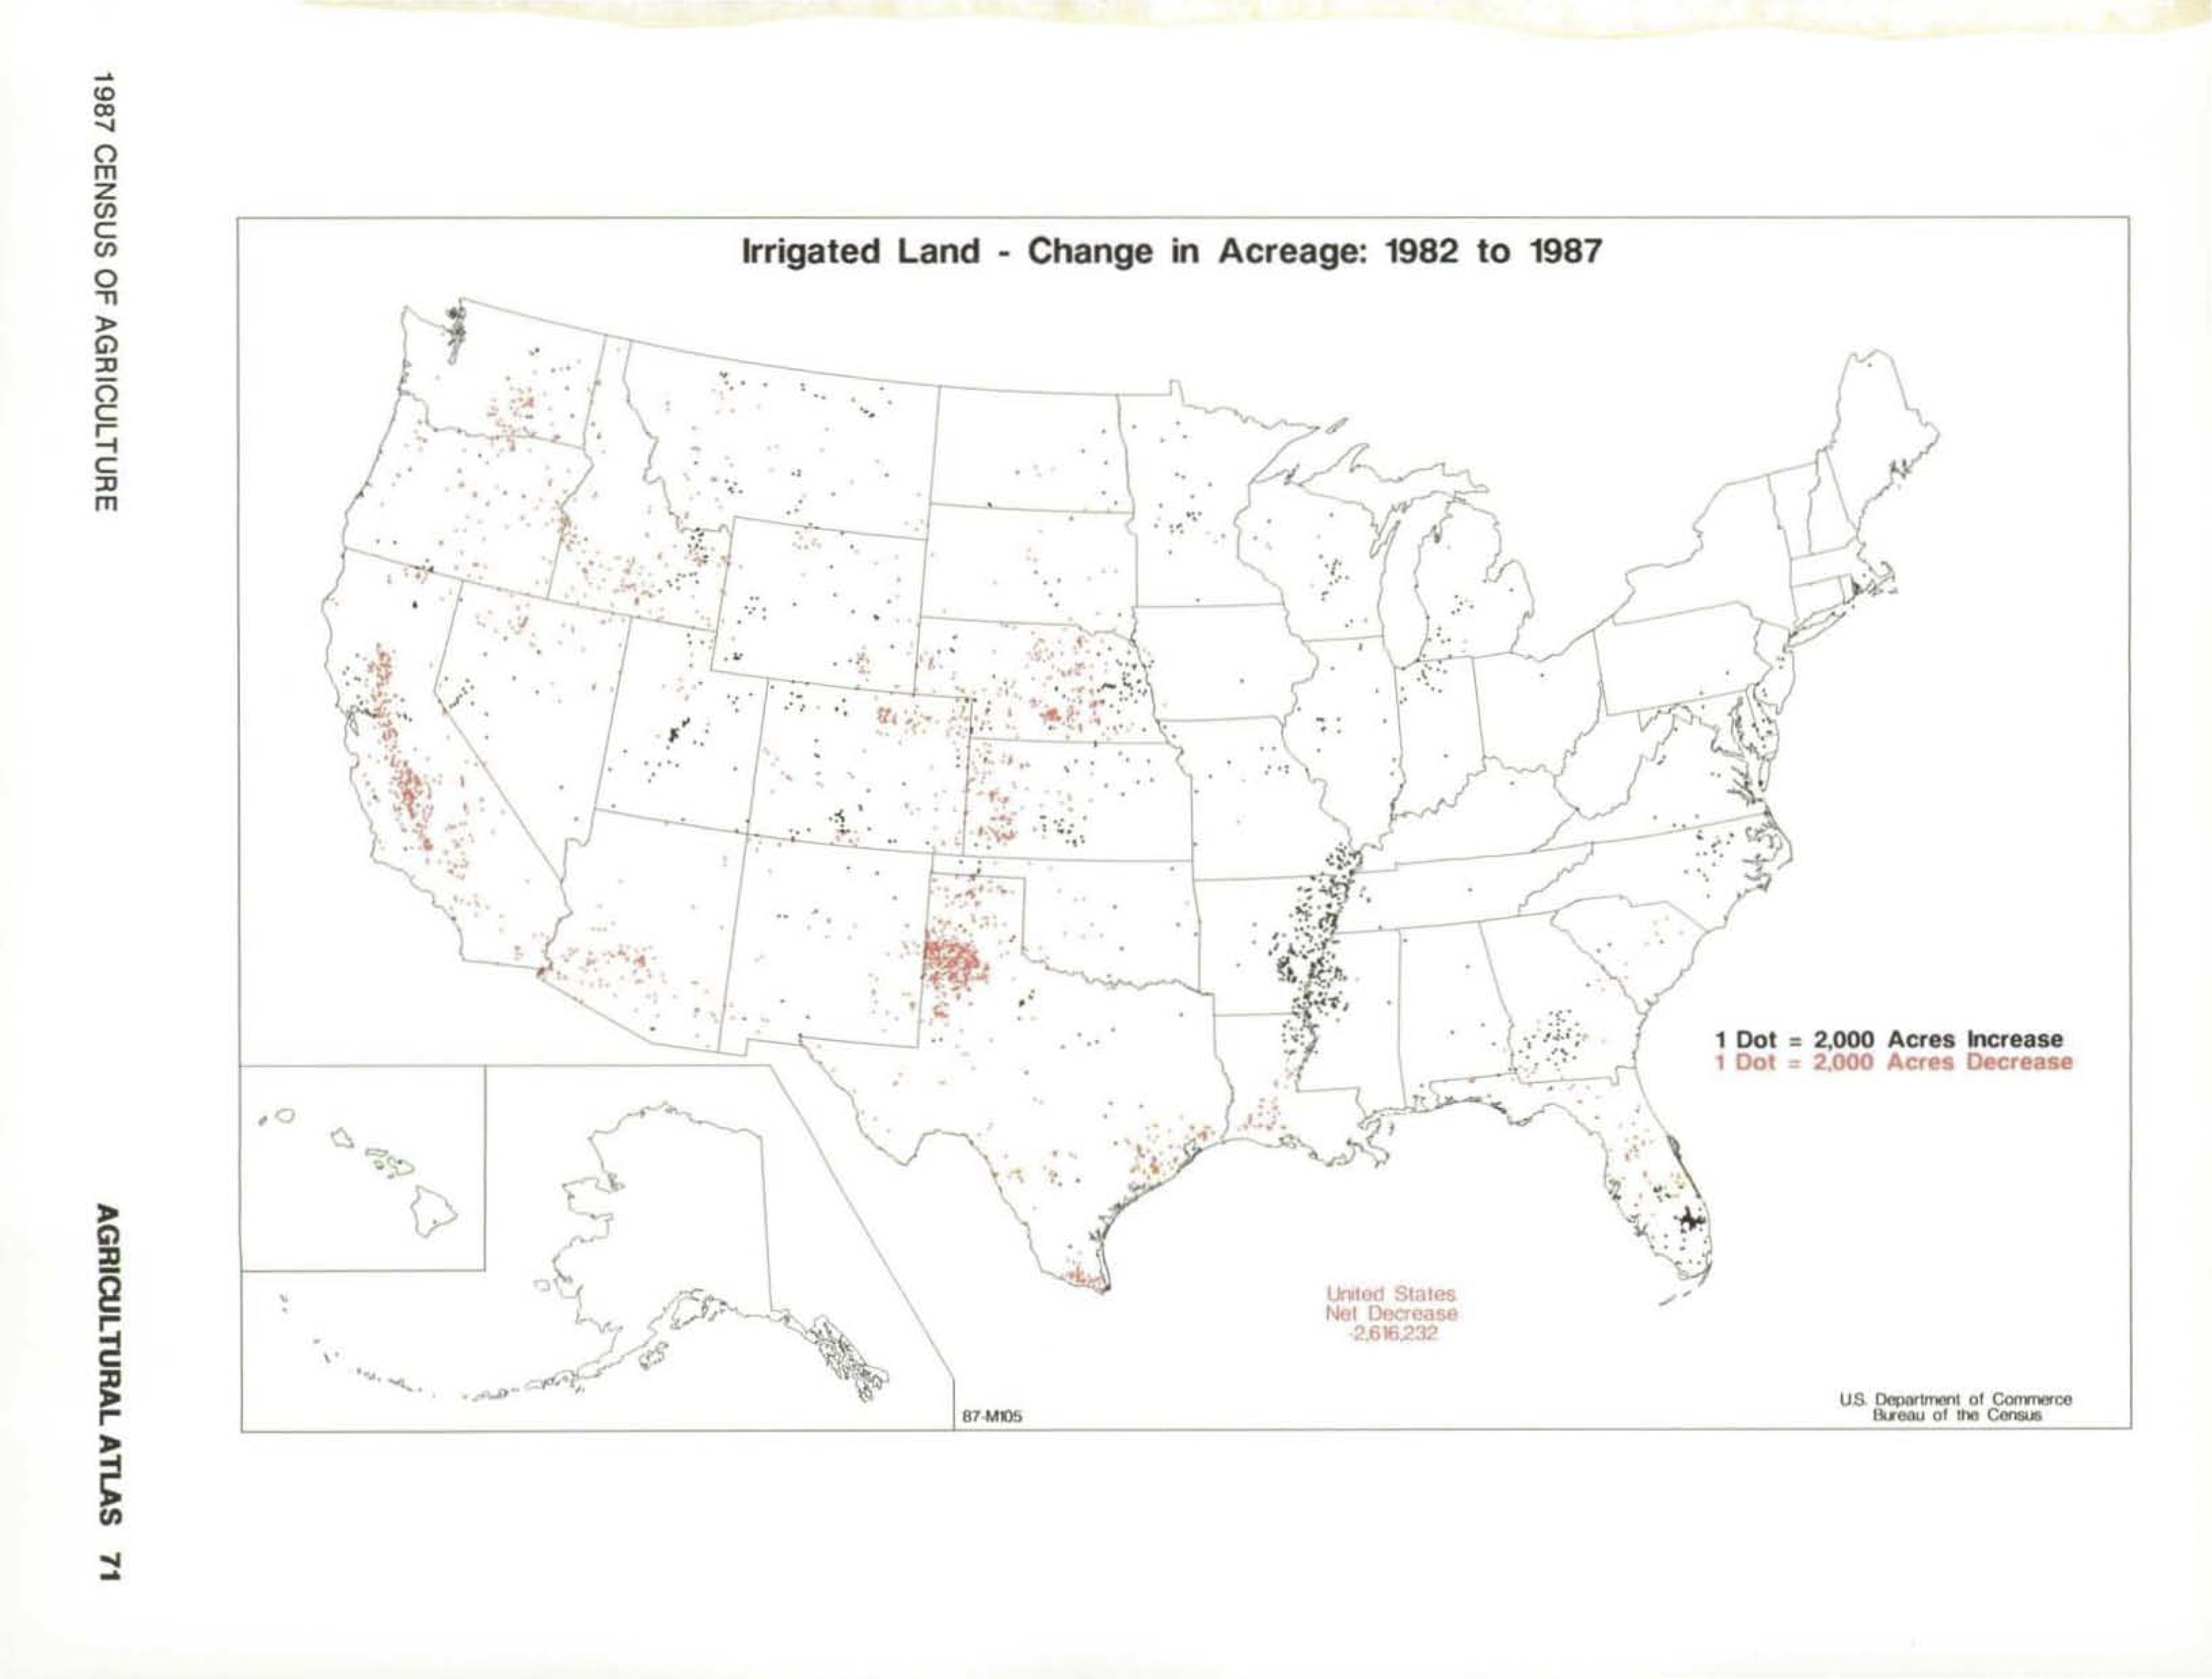 1987 Agricultural Atlas Of The United States IRRIGATION 52 Table 105